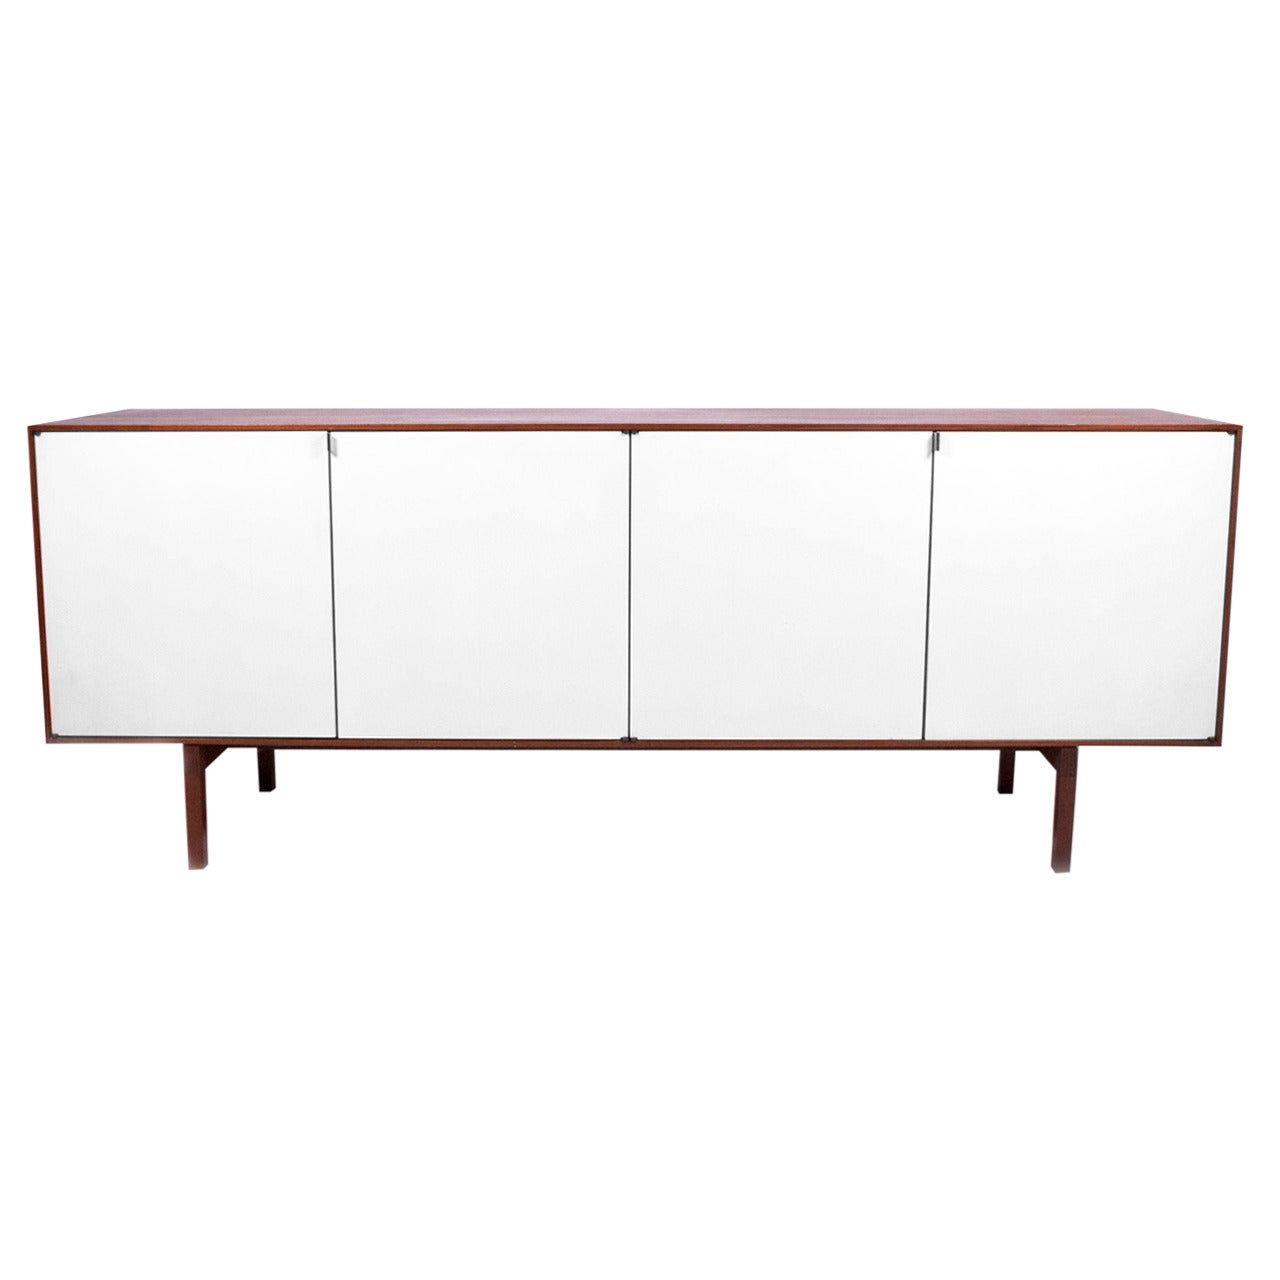 Credenza by Florence Knoll # 119